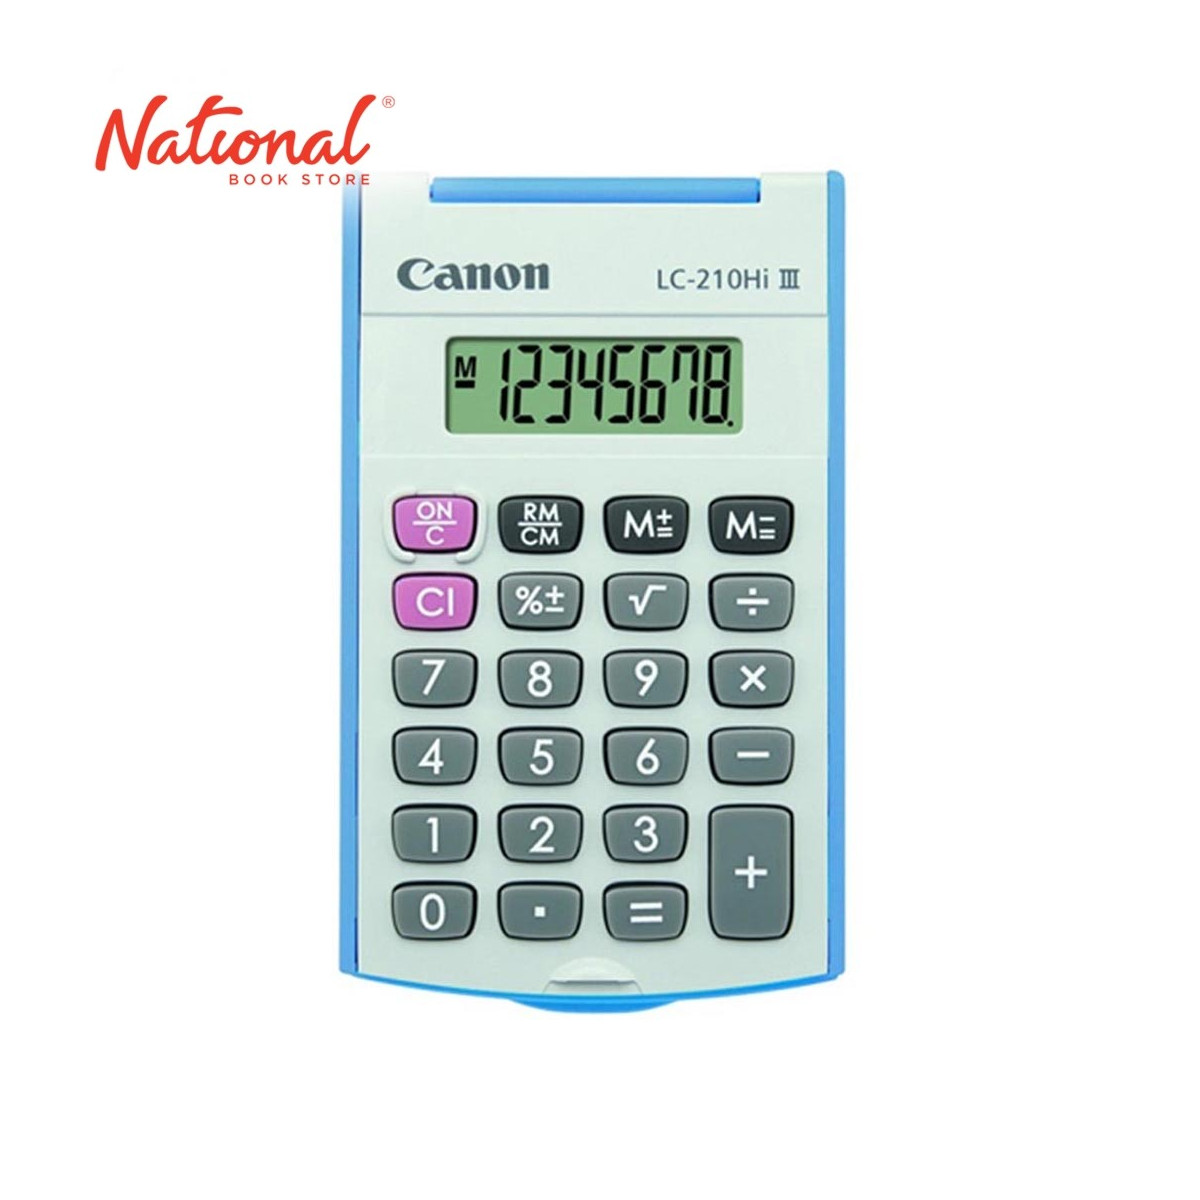 CANON HANDHELD CALCULATOR LC210HI III BL 8DIGITS BATTERY OPERATED FOLDING HARD COVER BLUE